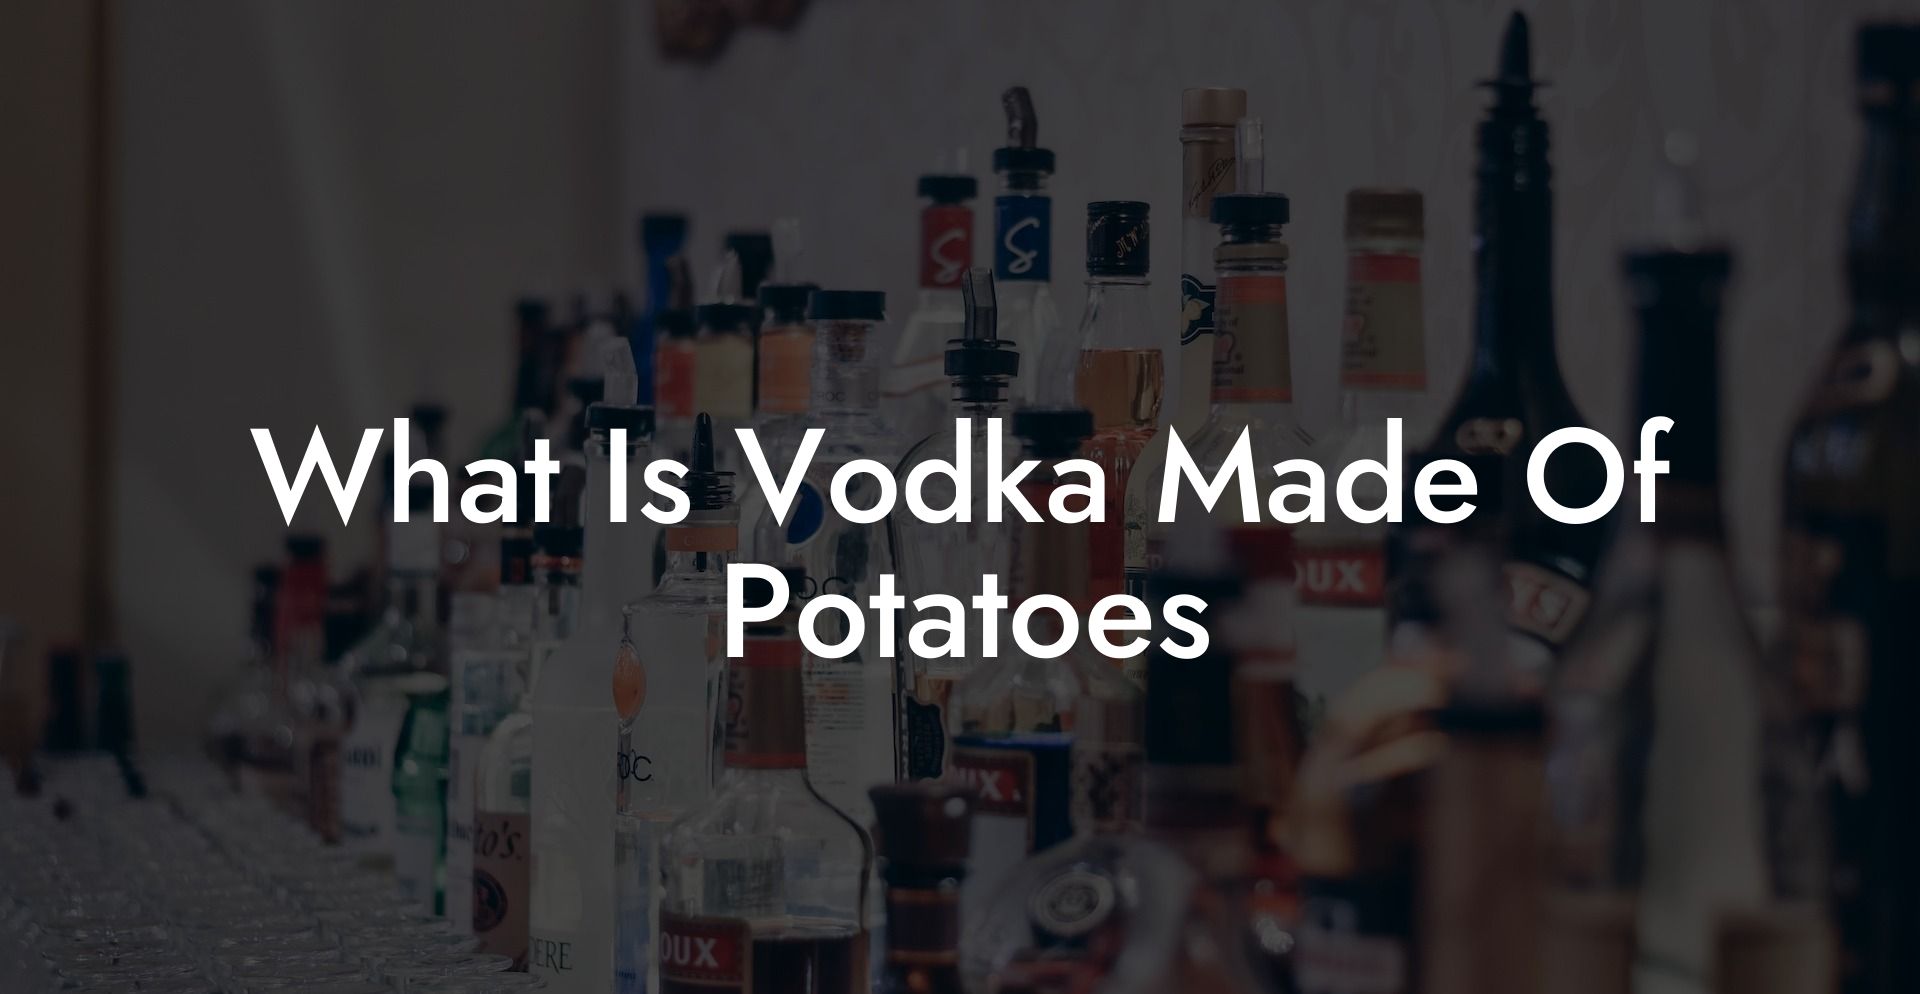 What Is Vodka Made Of Potatoes